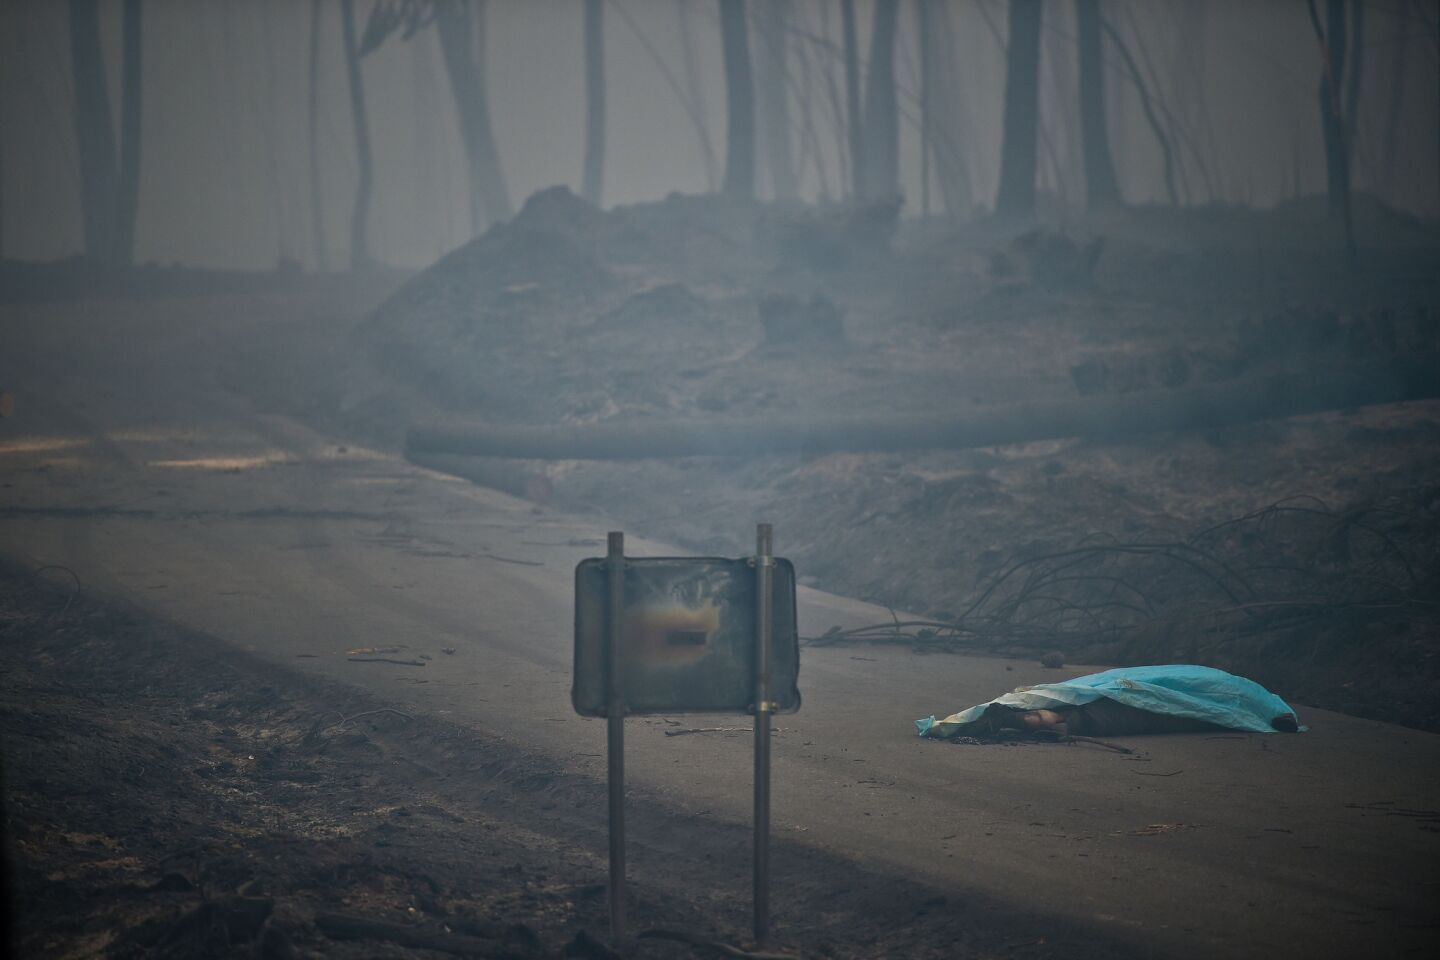 A fire victim's body lies covered by a blanket on a road in Pedrogao.